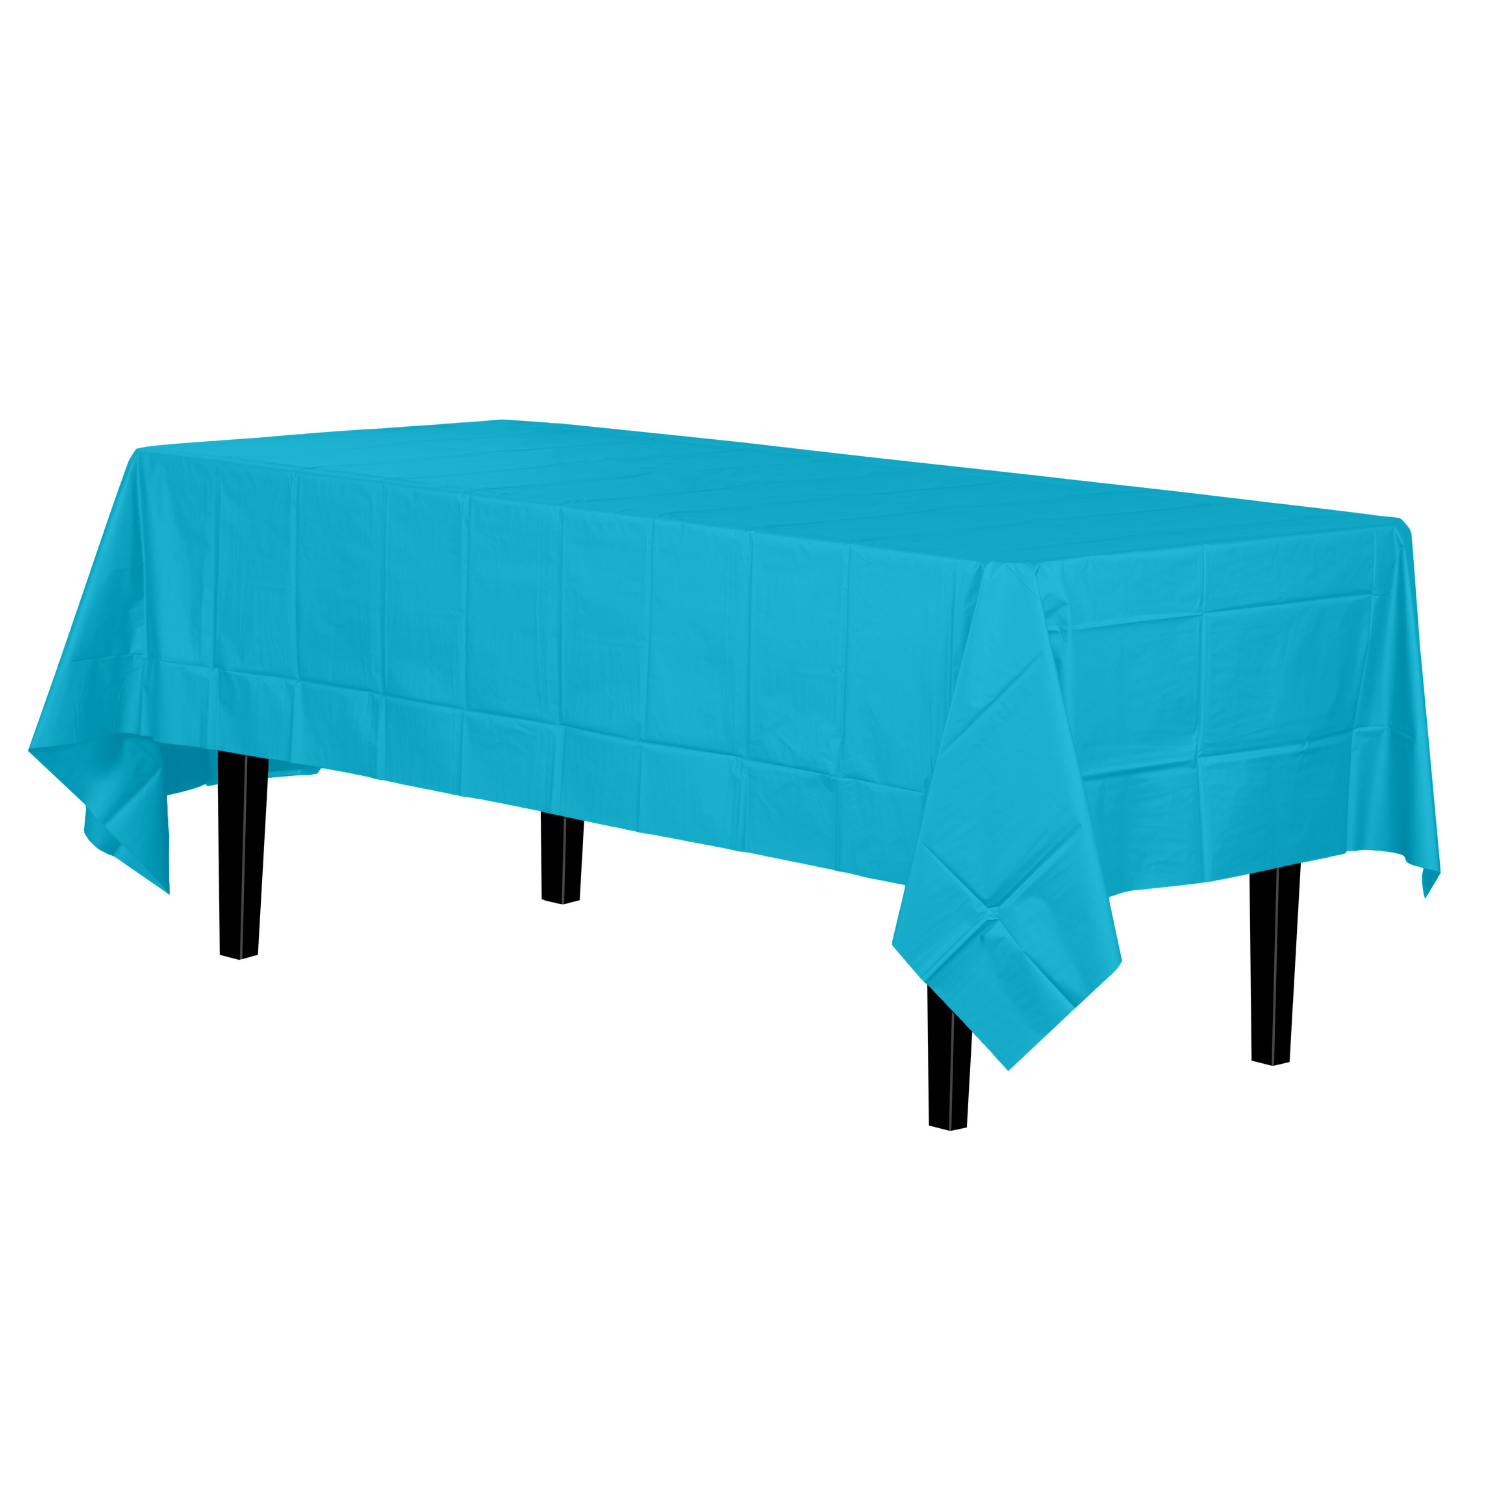 40 In. X 300 Ft. Premium Turquoise Plastic Table Roll | 4 Pack